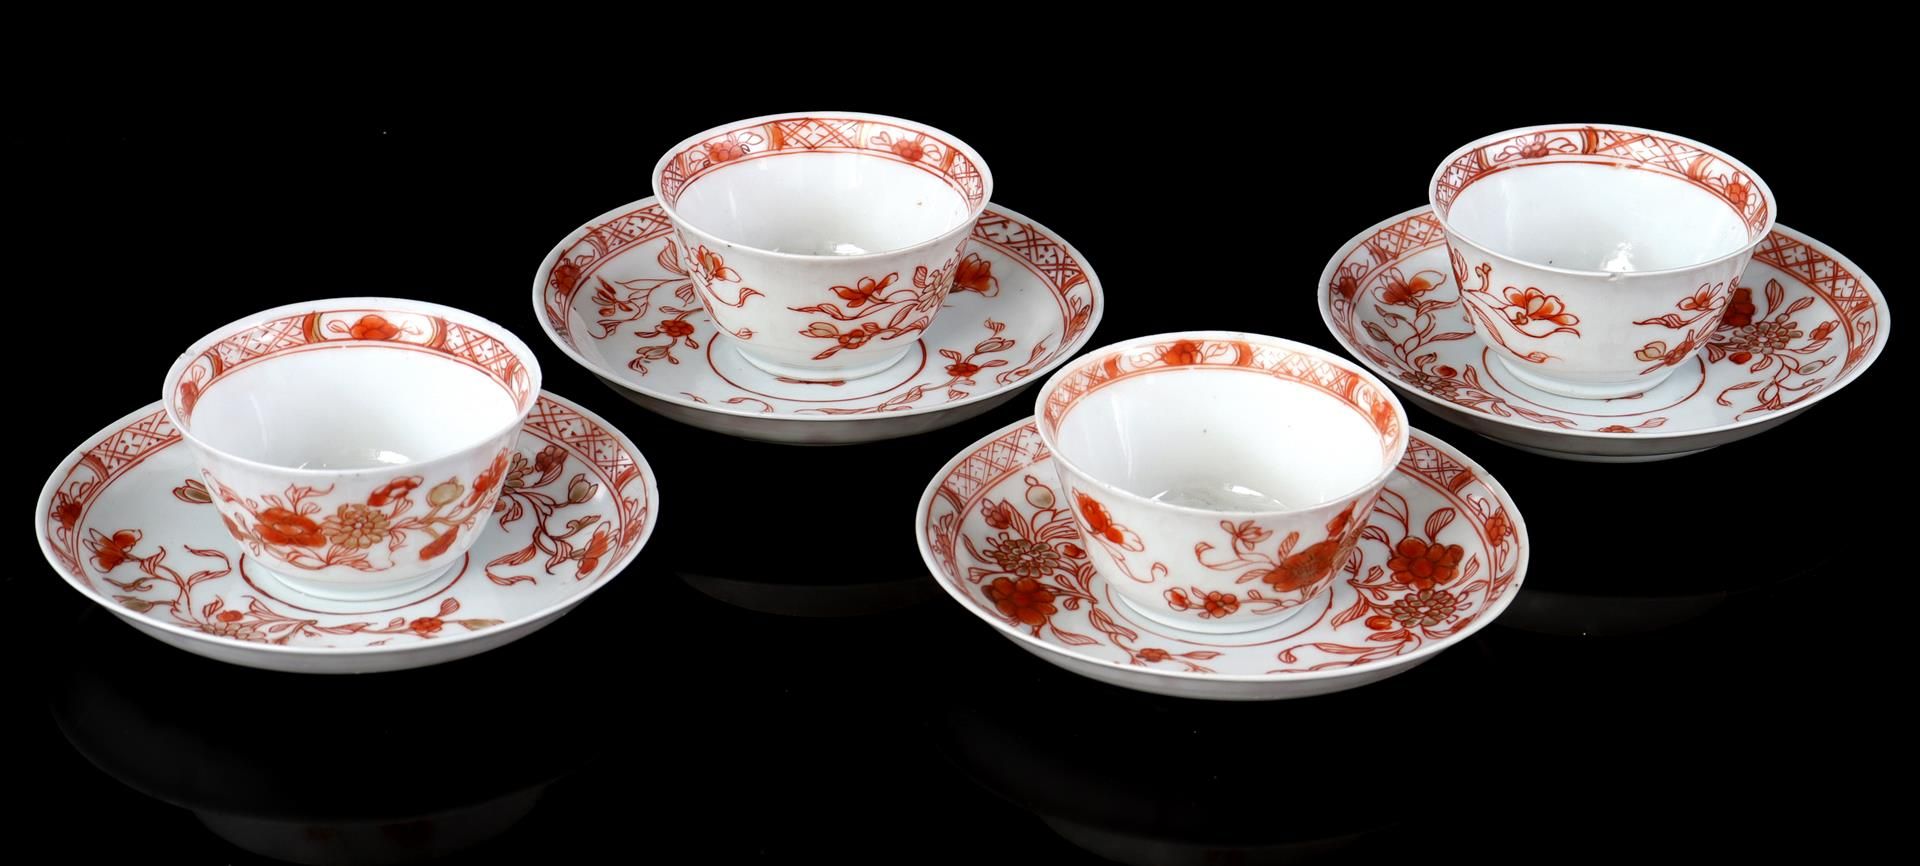 4 porcelain milk and blood cups and saucers